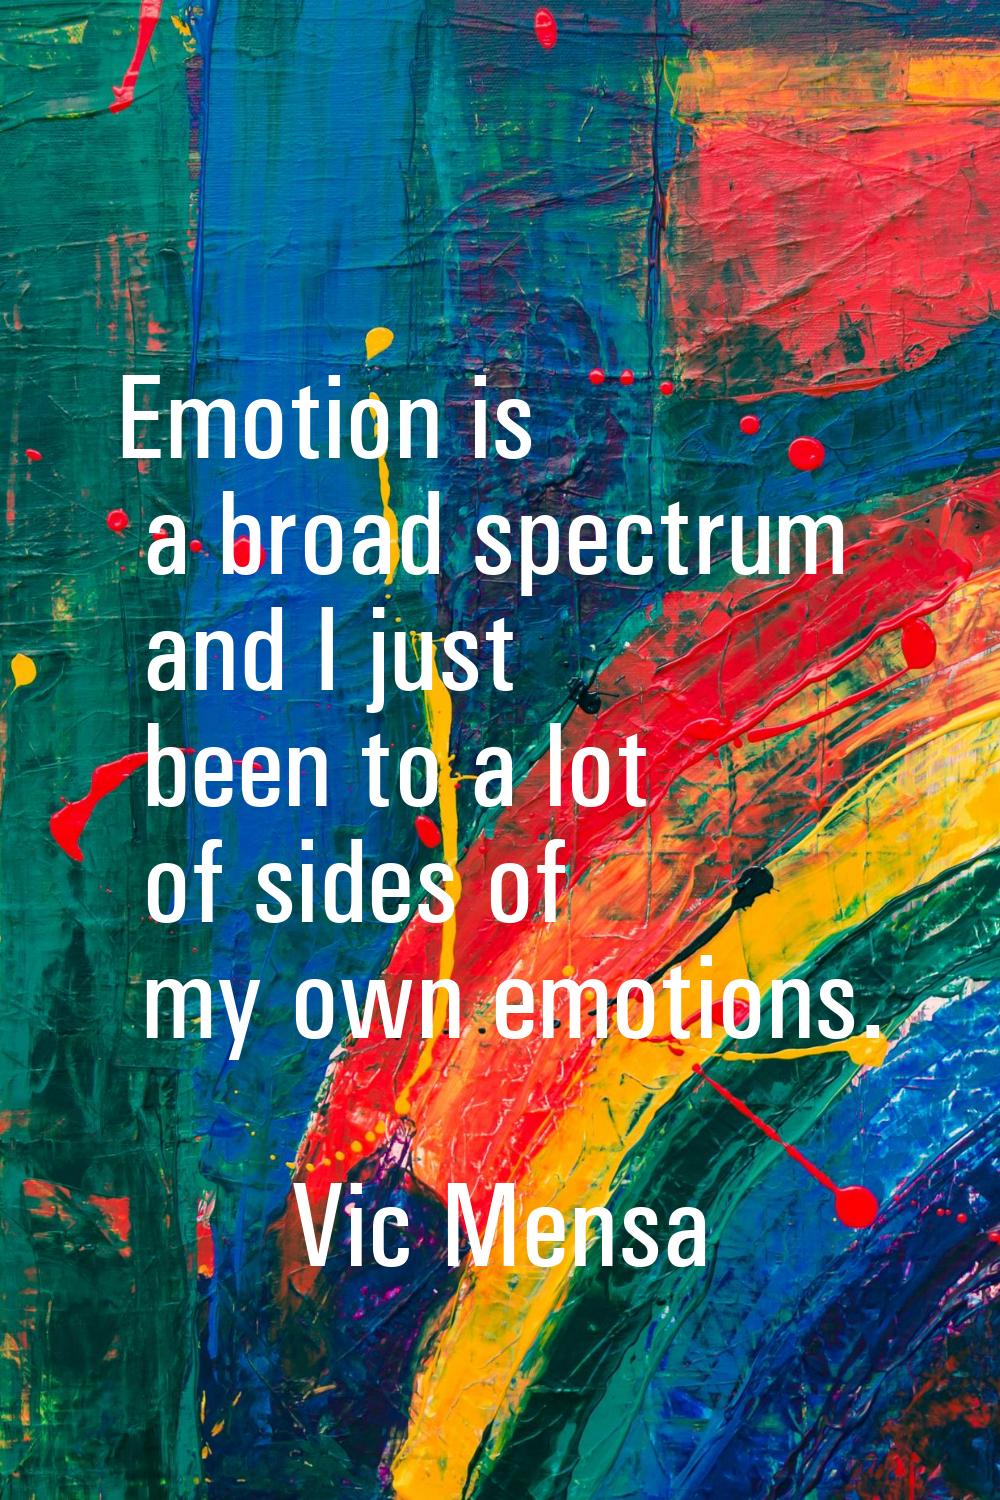 Emotion is a broad spectrum and I just been to a lot of sides of my own emotions.